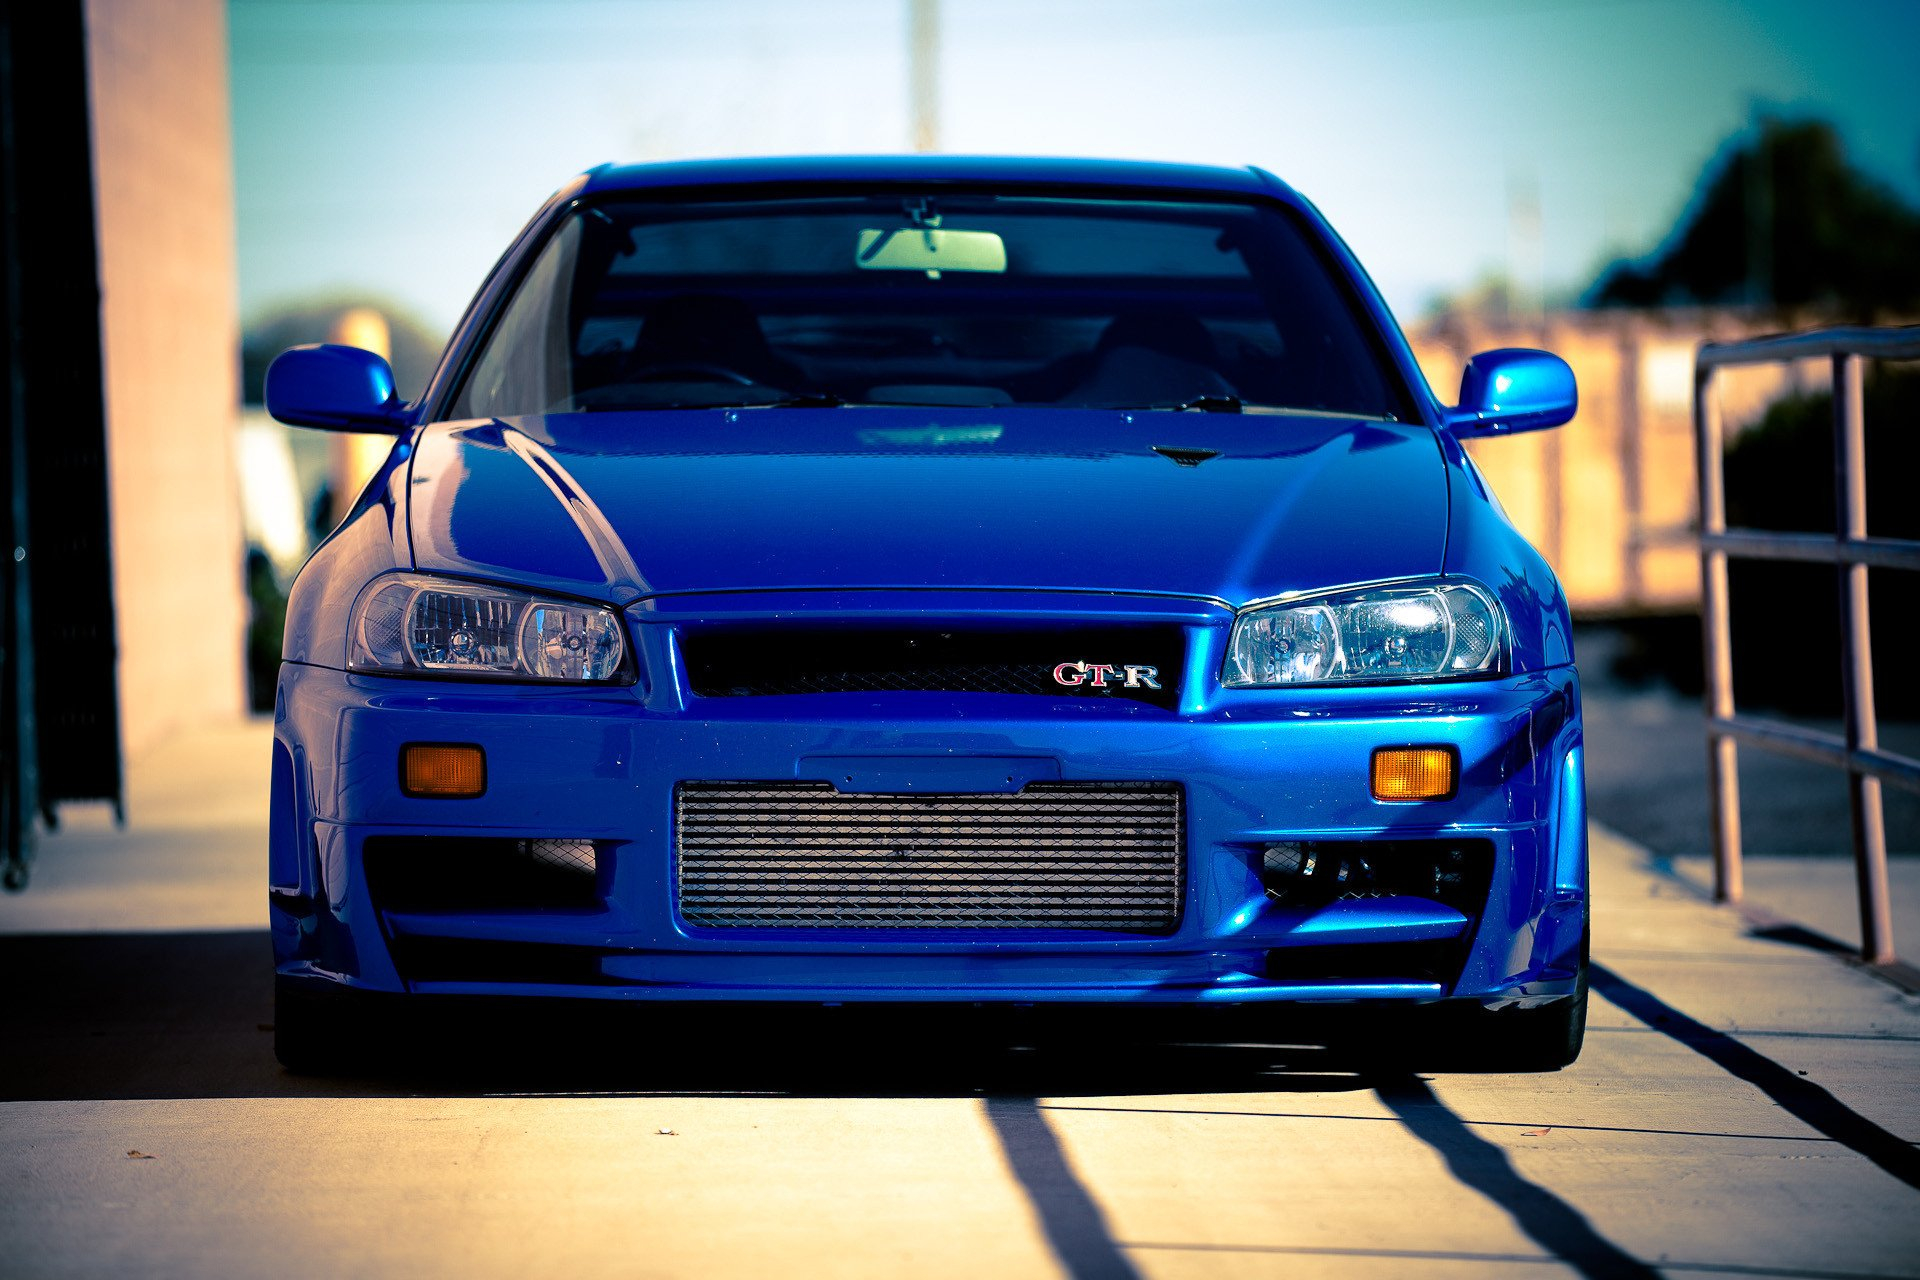 1920x1280 nissan, Skyline, Gtr, R34, Car, Blue, Tuning Wallpapers HD / Desktop and Mobile Backgrounds